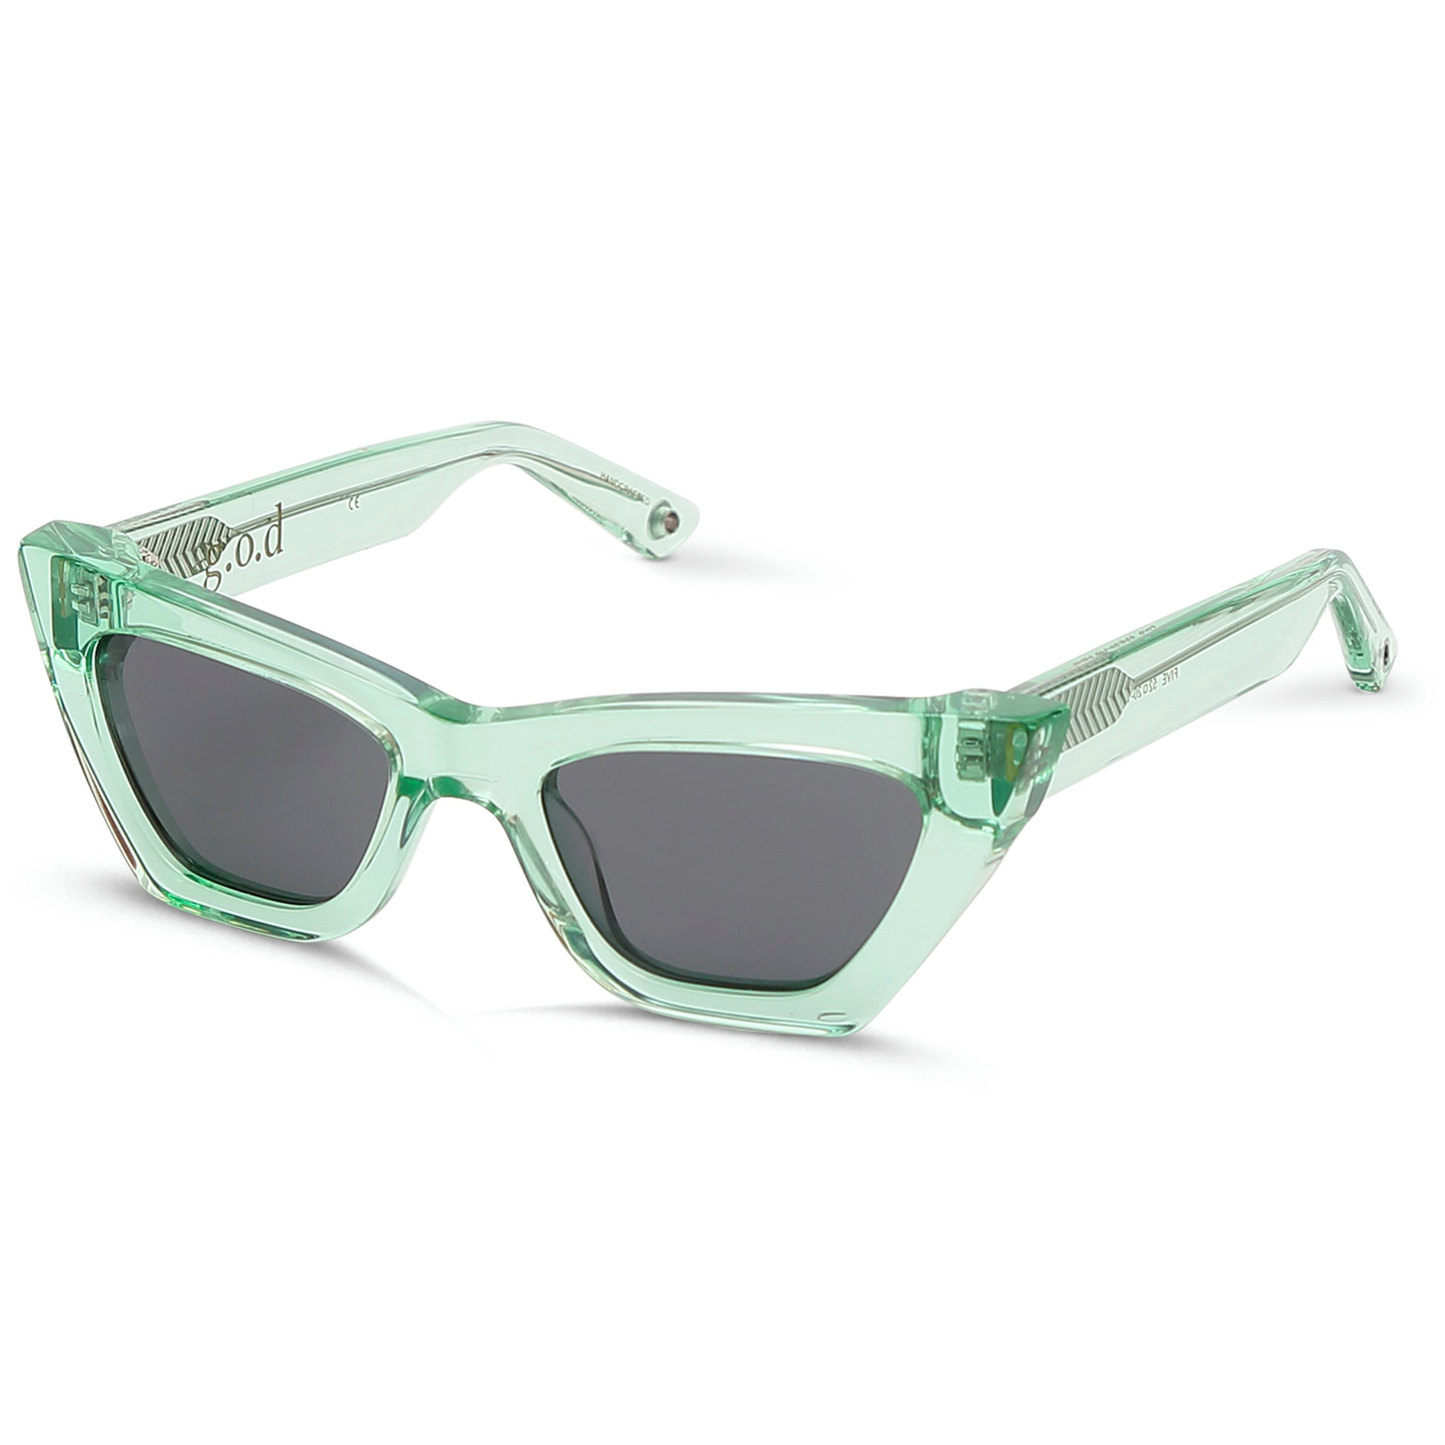 Five Mint Sunglass with Grey Lens